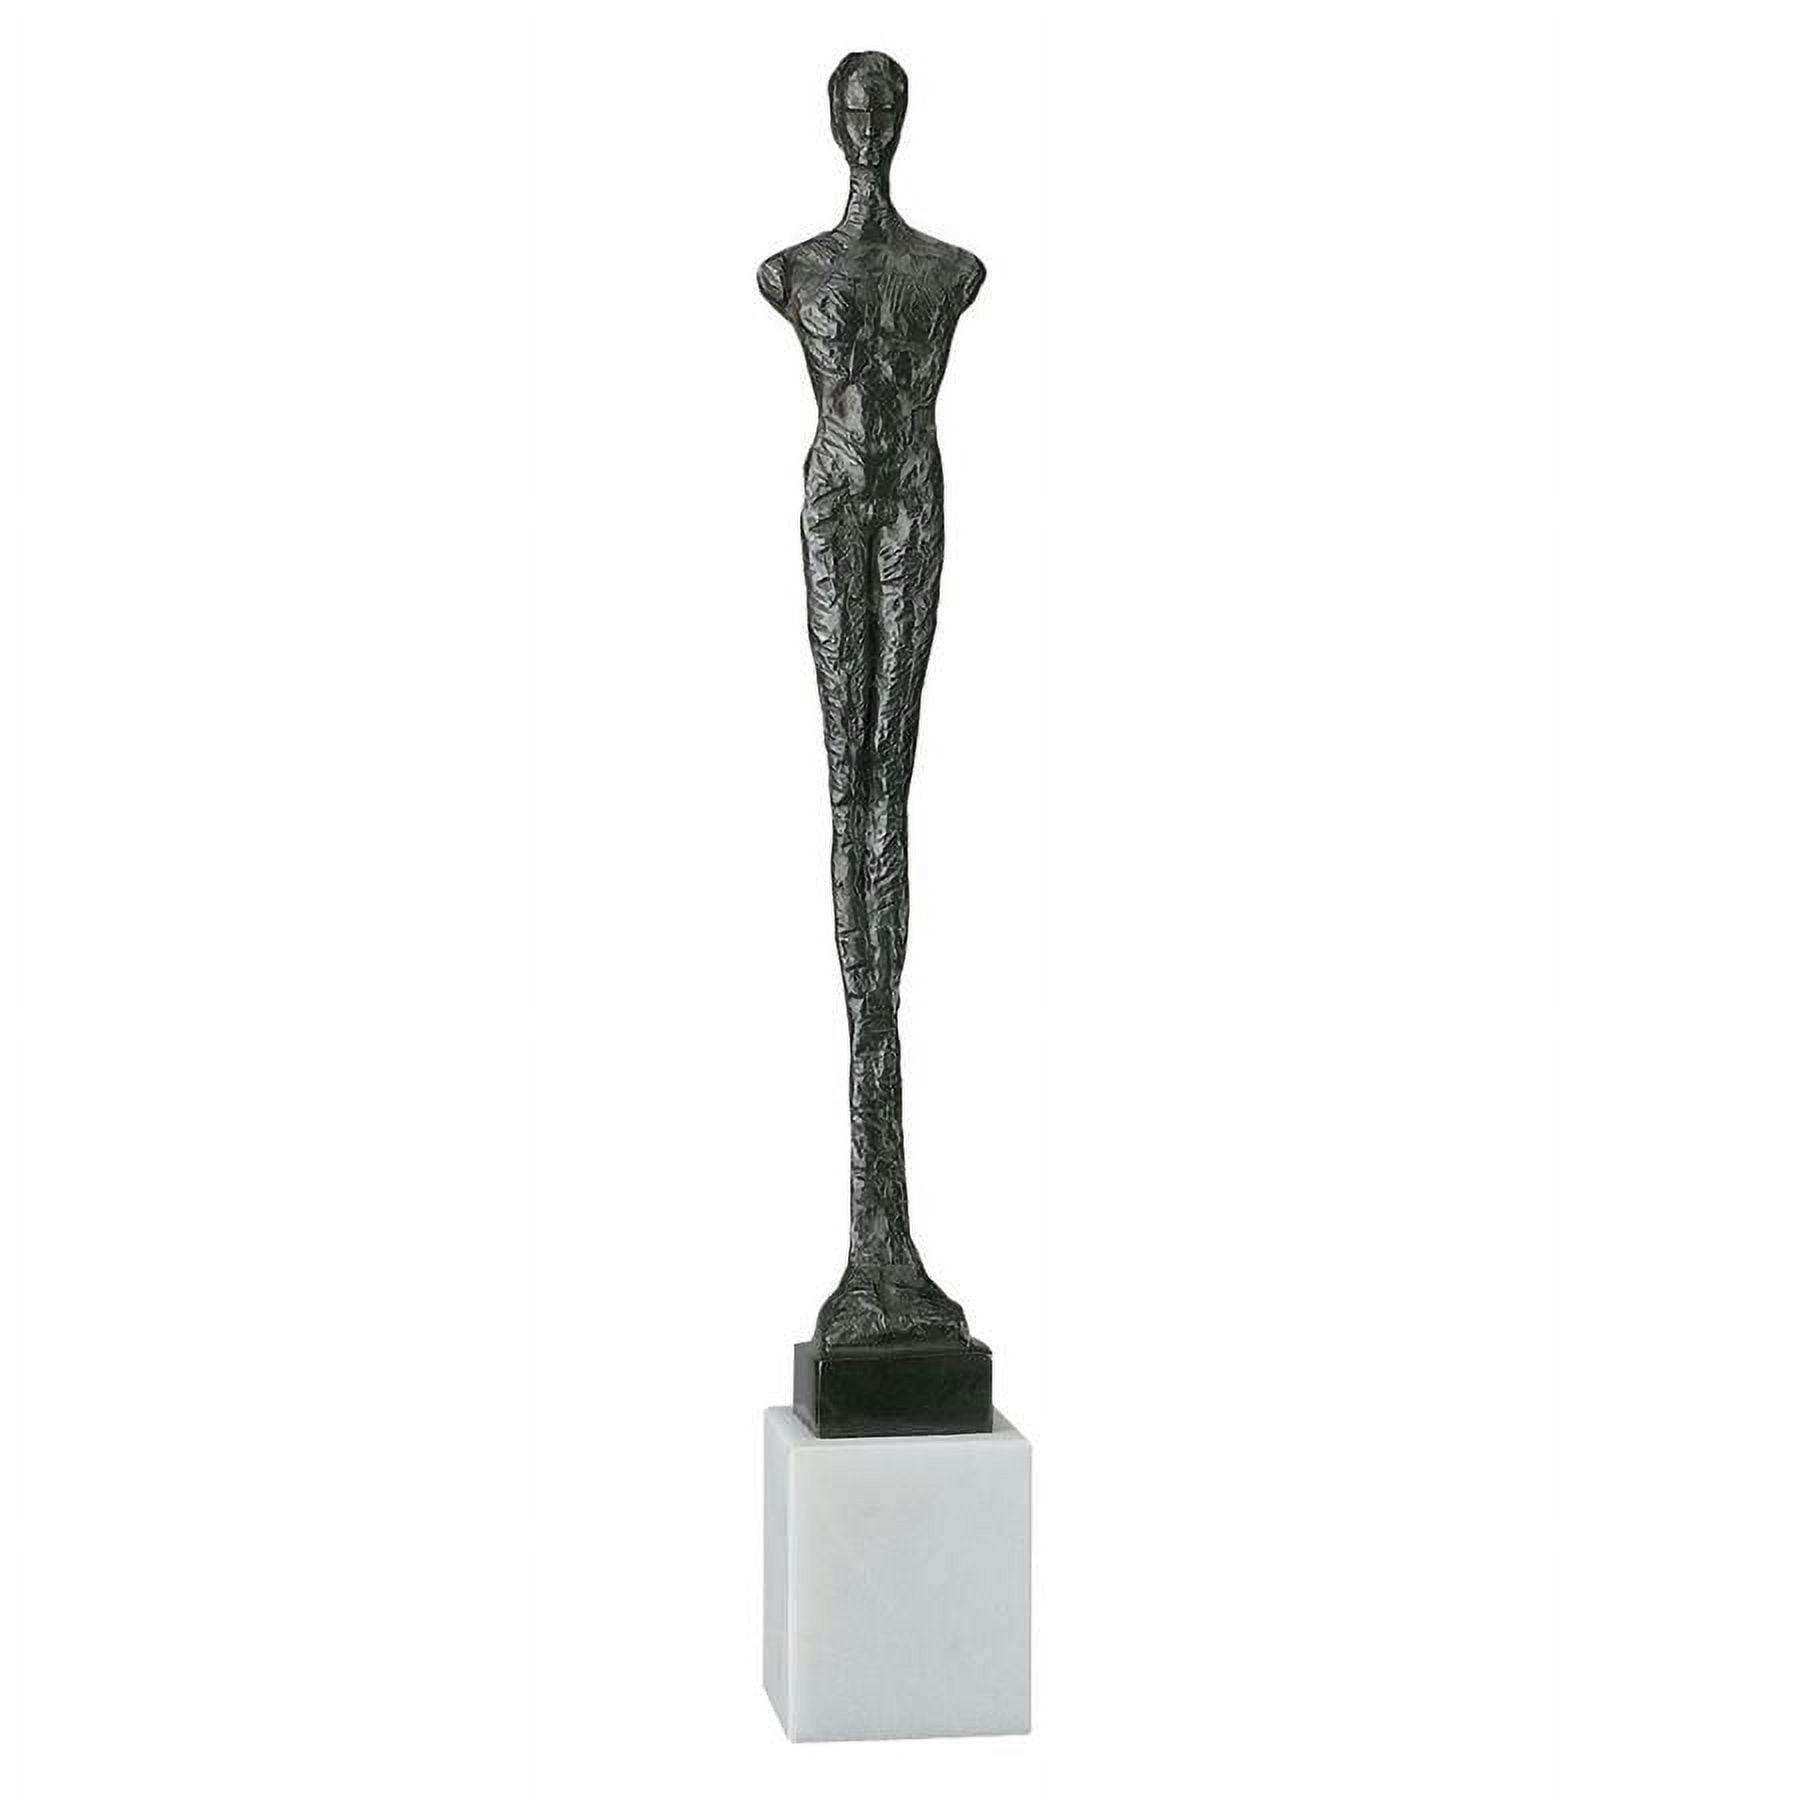 Contemporary Iron Male Form Sculpture on Marble Base, 24" Height